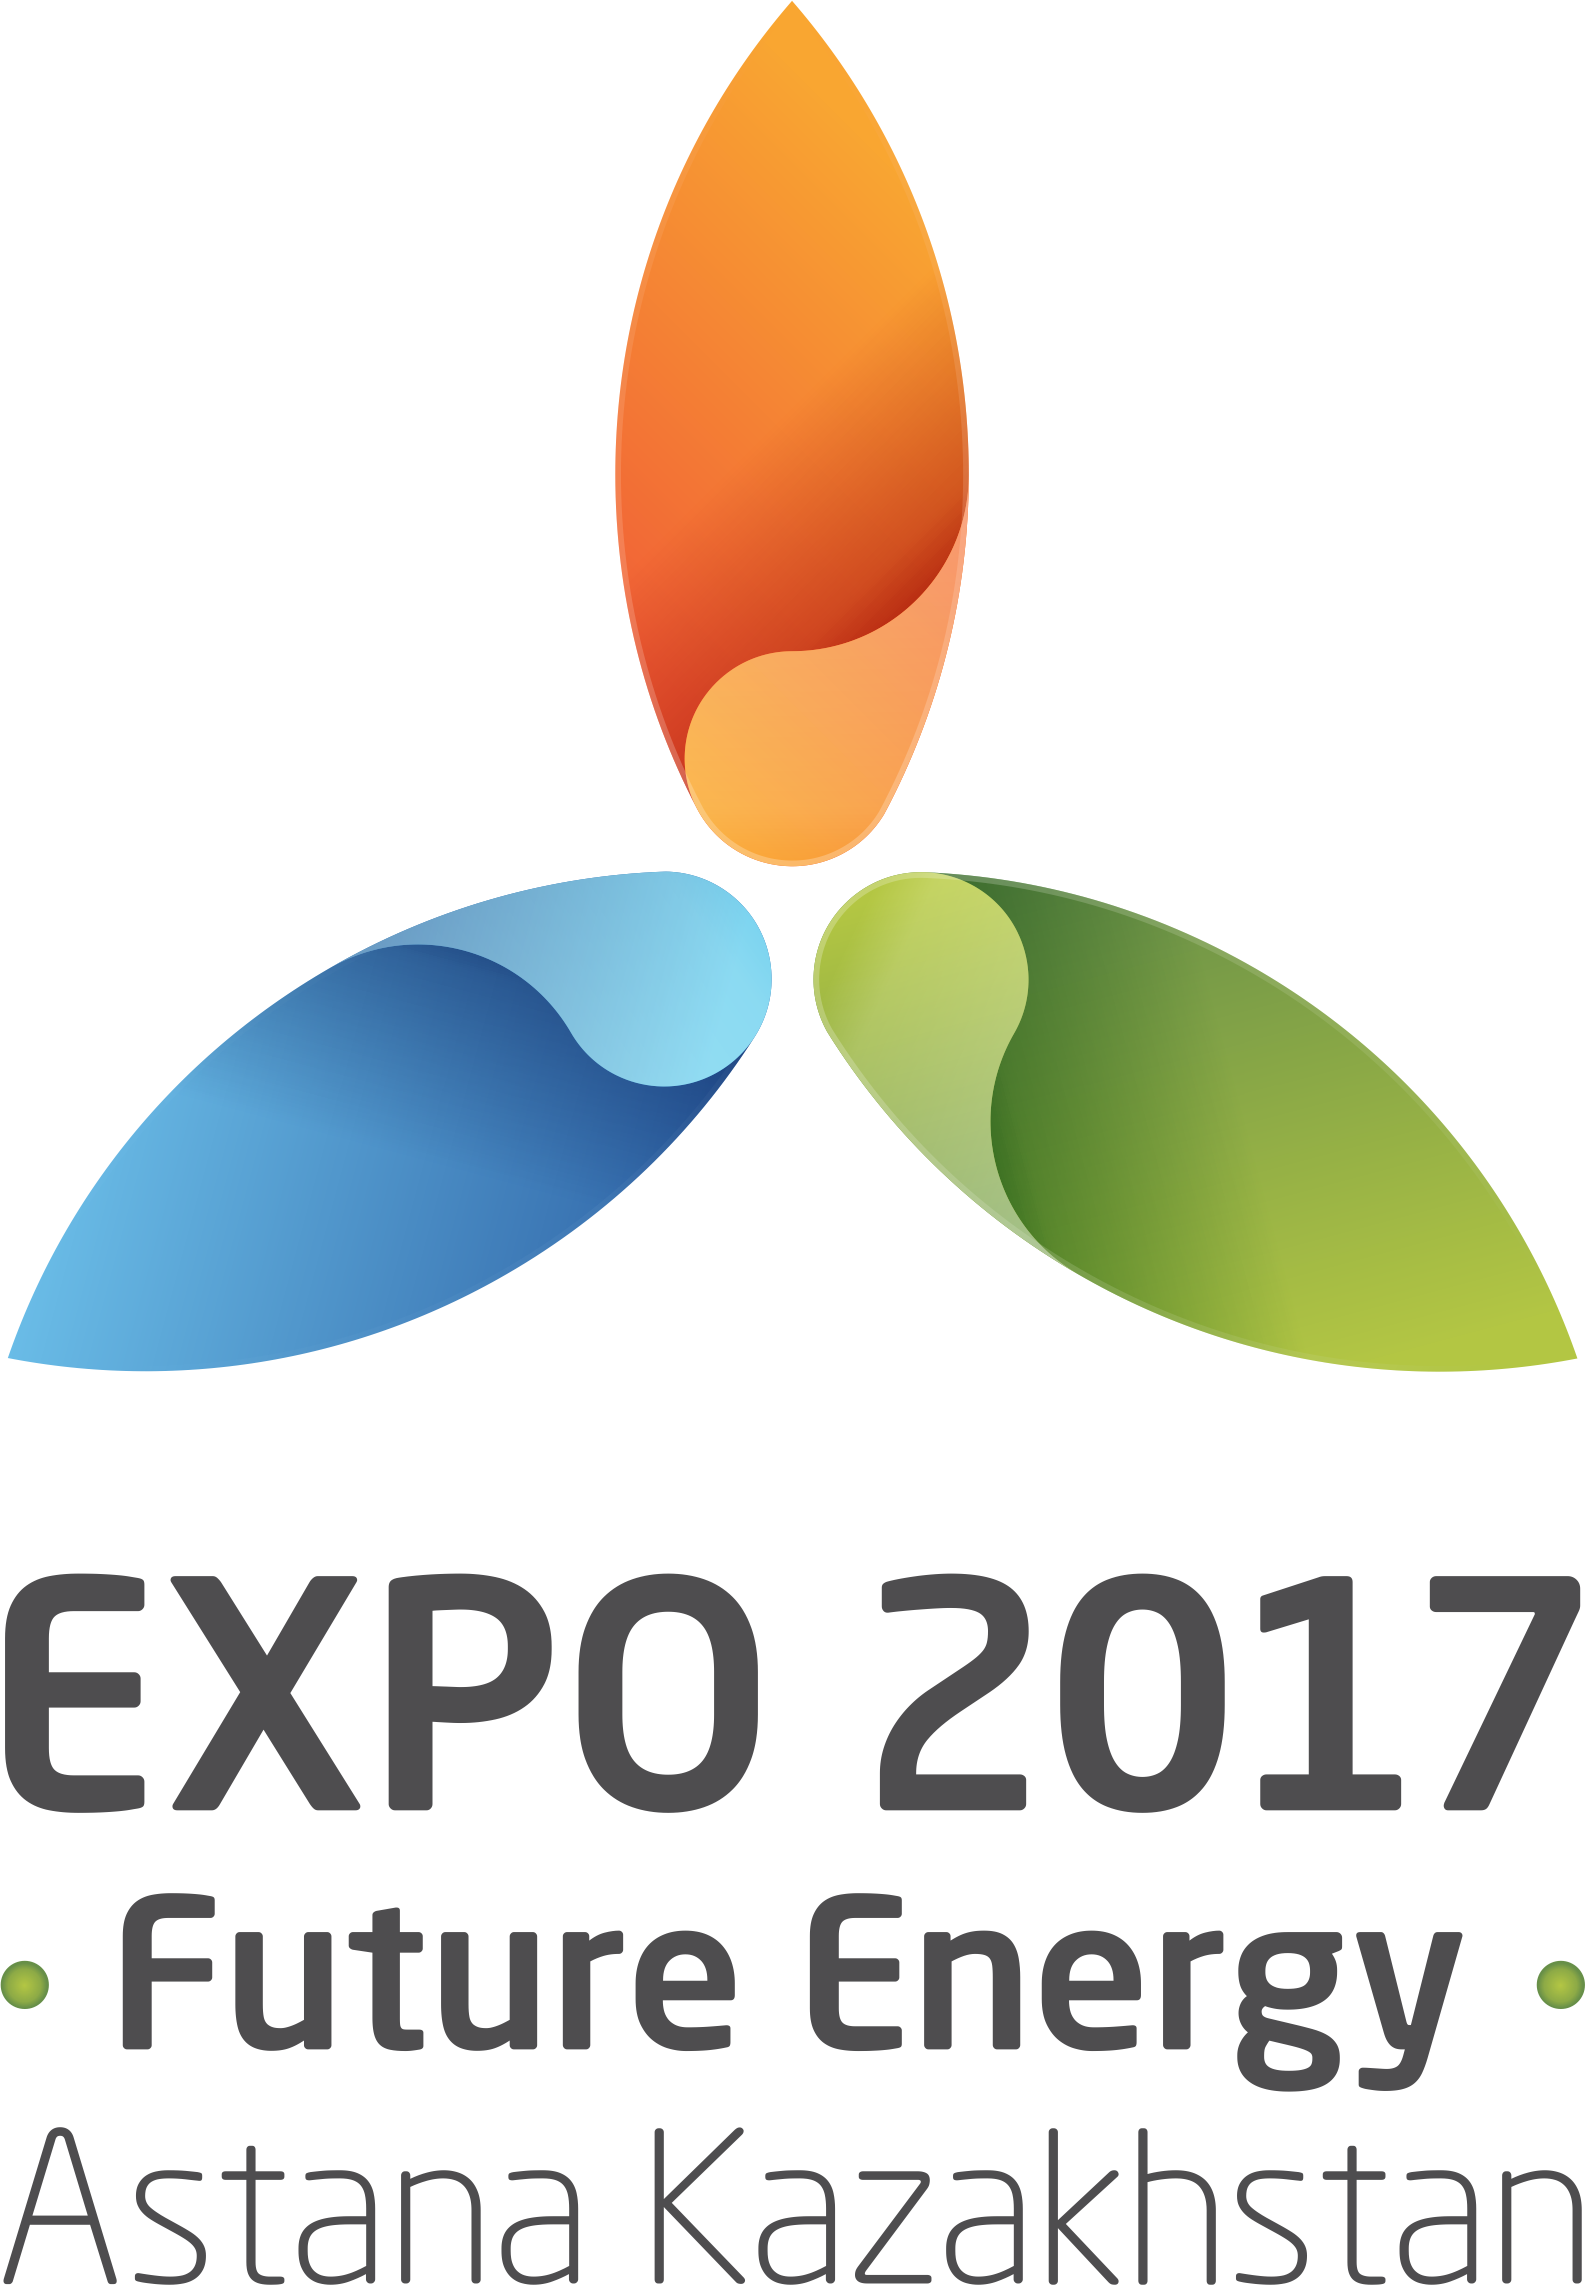 205,561 people visited the EXPO-2017 Exhibition in the first week of its operation. 